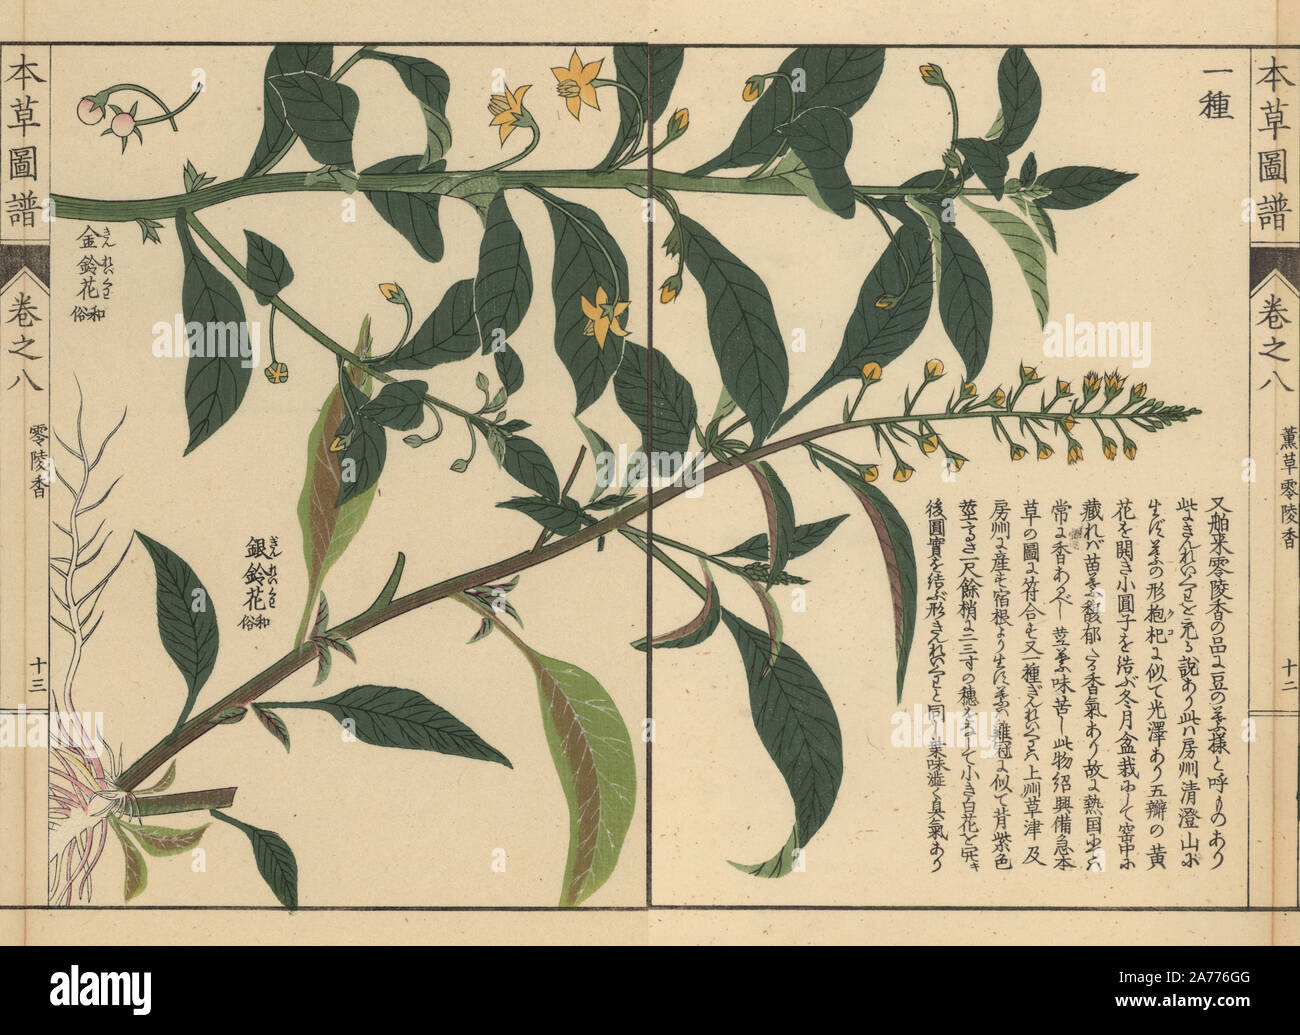 Shikoku loosestrife, Lysimachia sikokiana Miq. and loosestrife species, Lysimachia decurrens Forst. Colour-printed woodblock engraving by Kan'en Iwasaki from 'Honzo Zufu,' an Illustrated Guide to Medicinal Plants, Japan, 1884. Iwasaki (1786-1842) was a Japanese botanist, entomologist and zoologist. He was one of the first Japanese botanists to incorporate western knowledge into his studies. Stock Photo